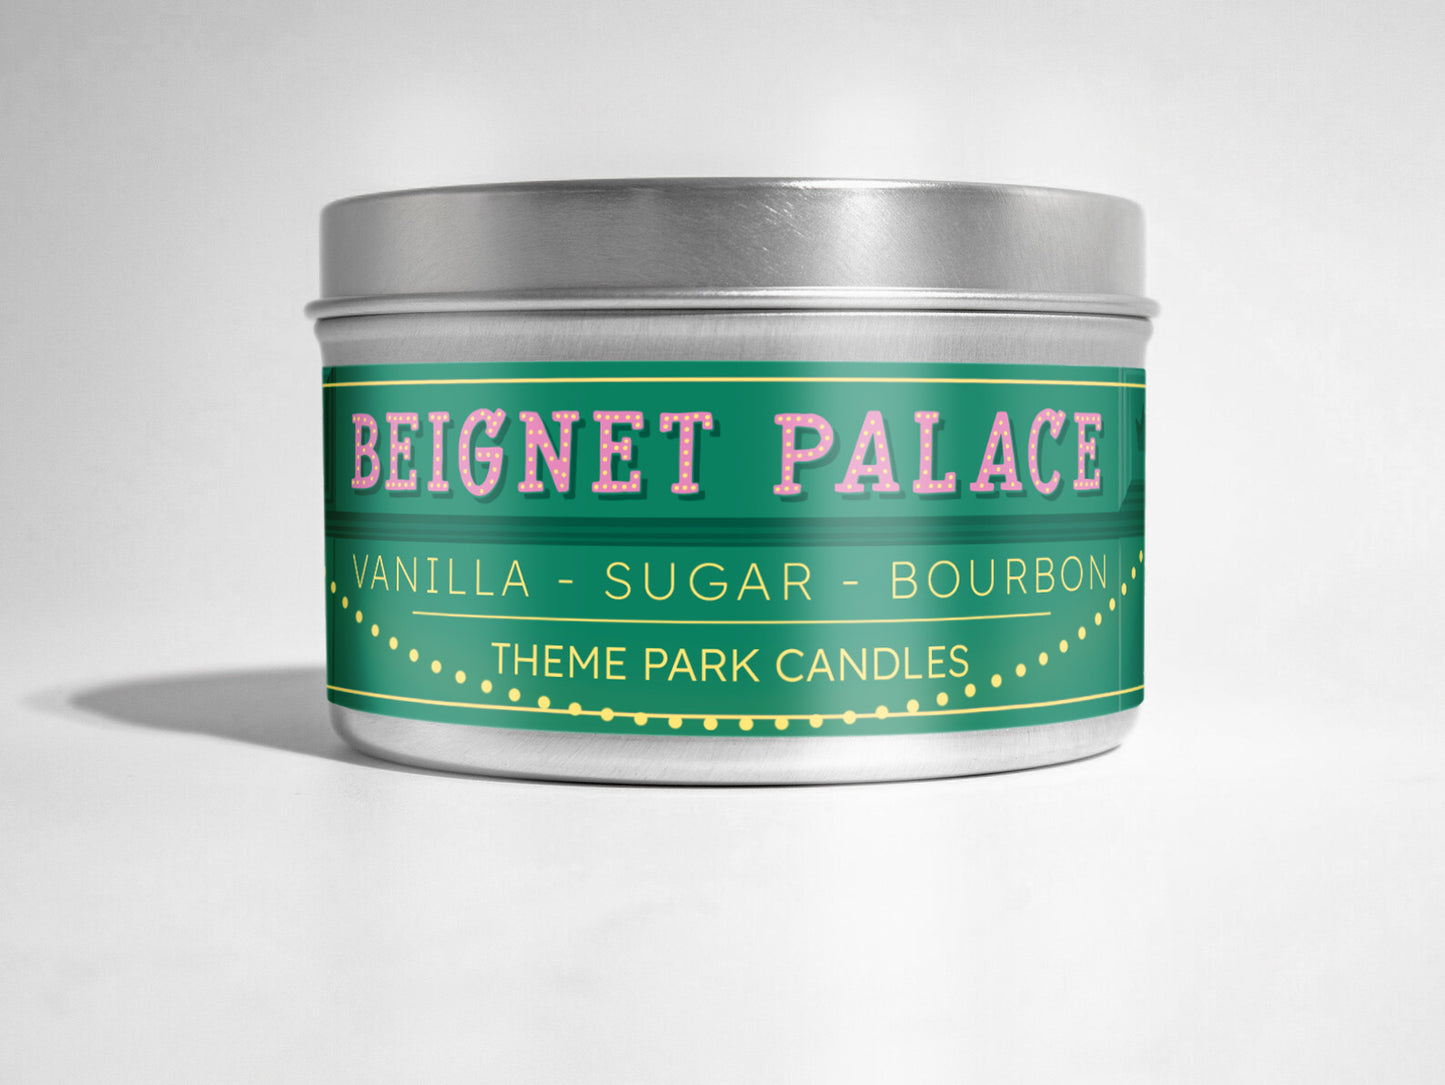 Beignet Palace Candle